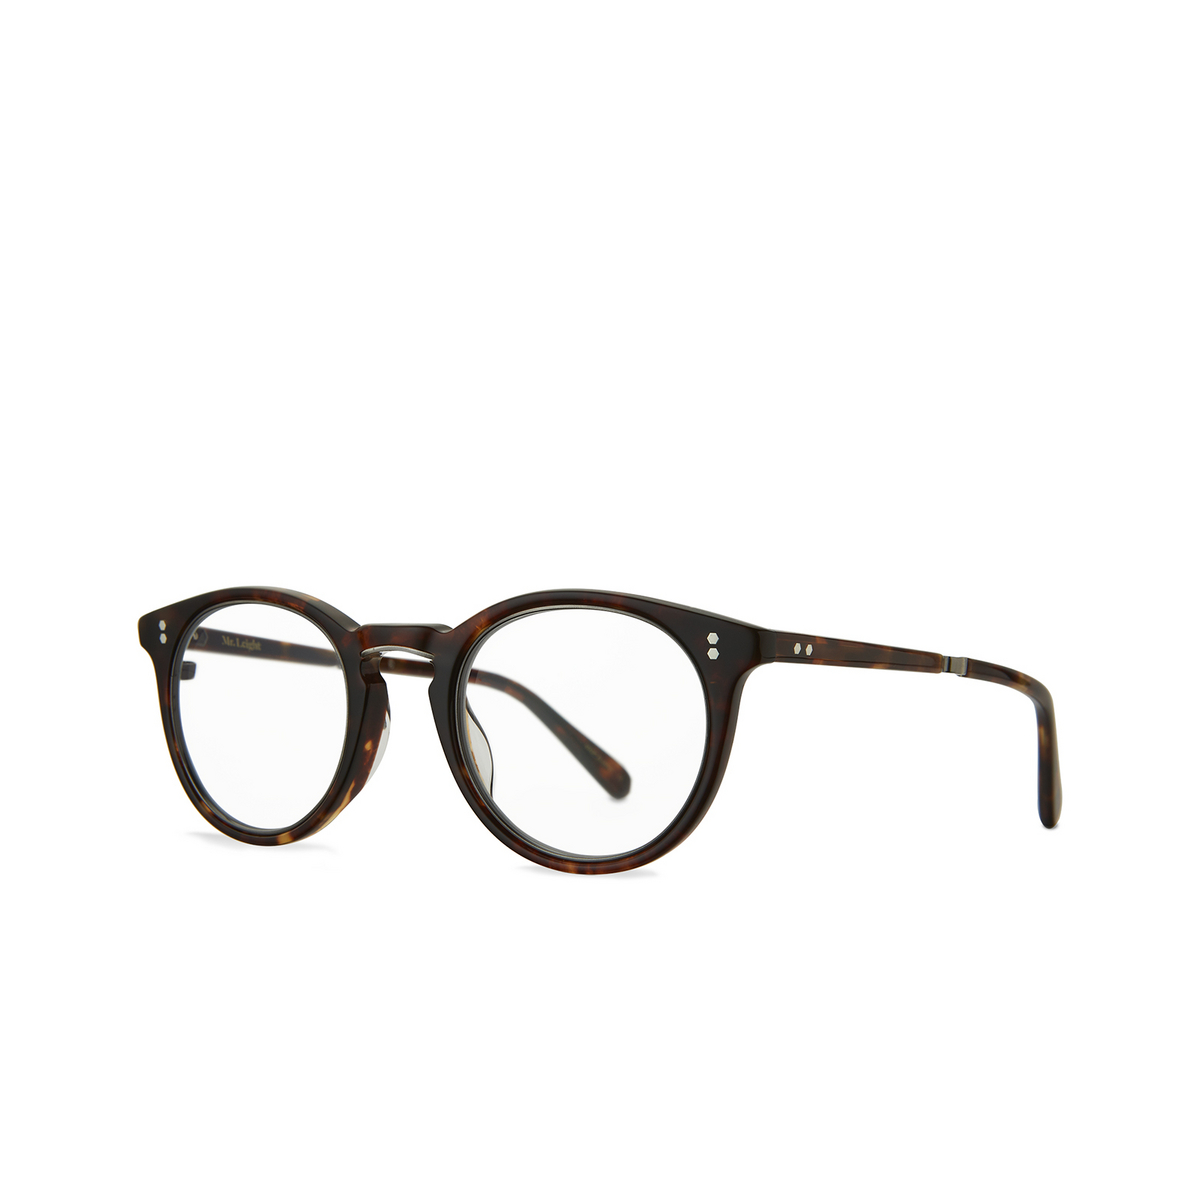 Mr. Leight® Round Eyeglasses: Crosby C color Maple - Antique Gold Mpl-antplt - three-quarters view.